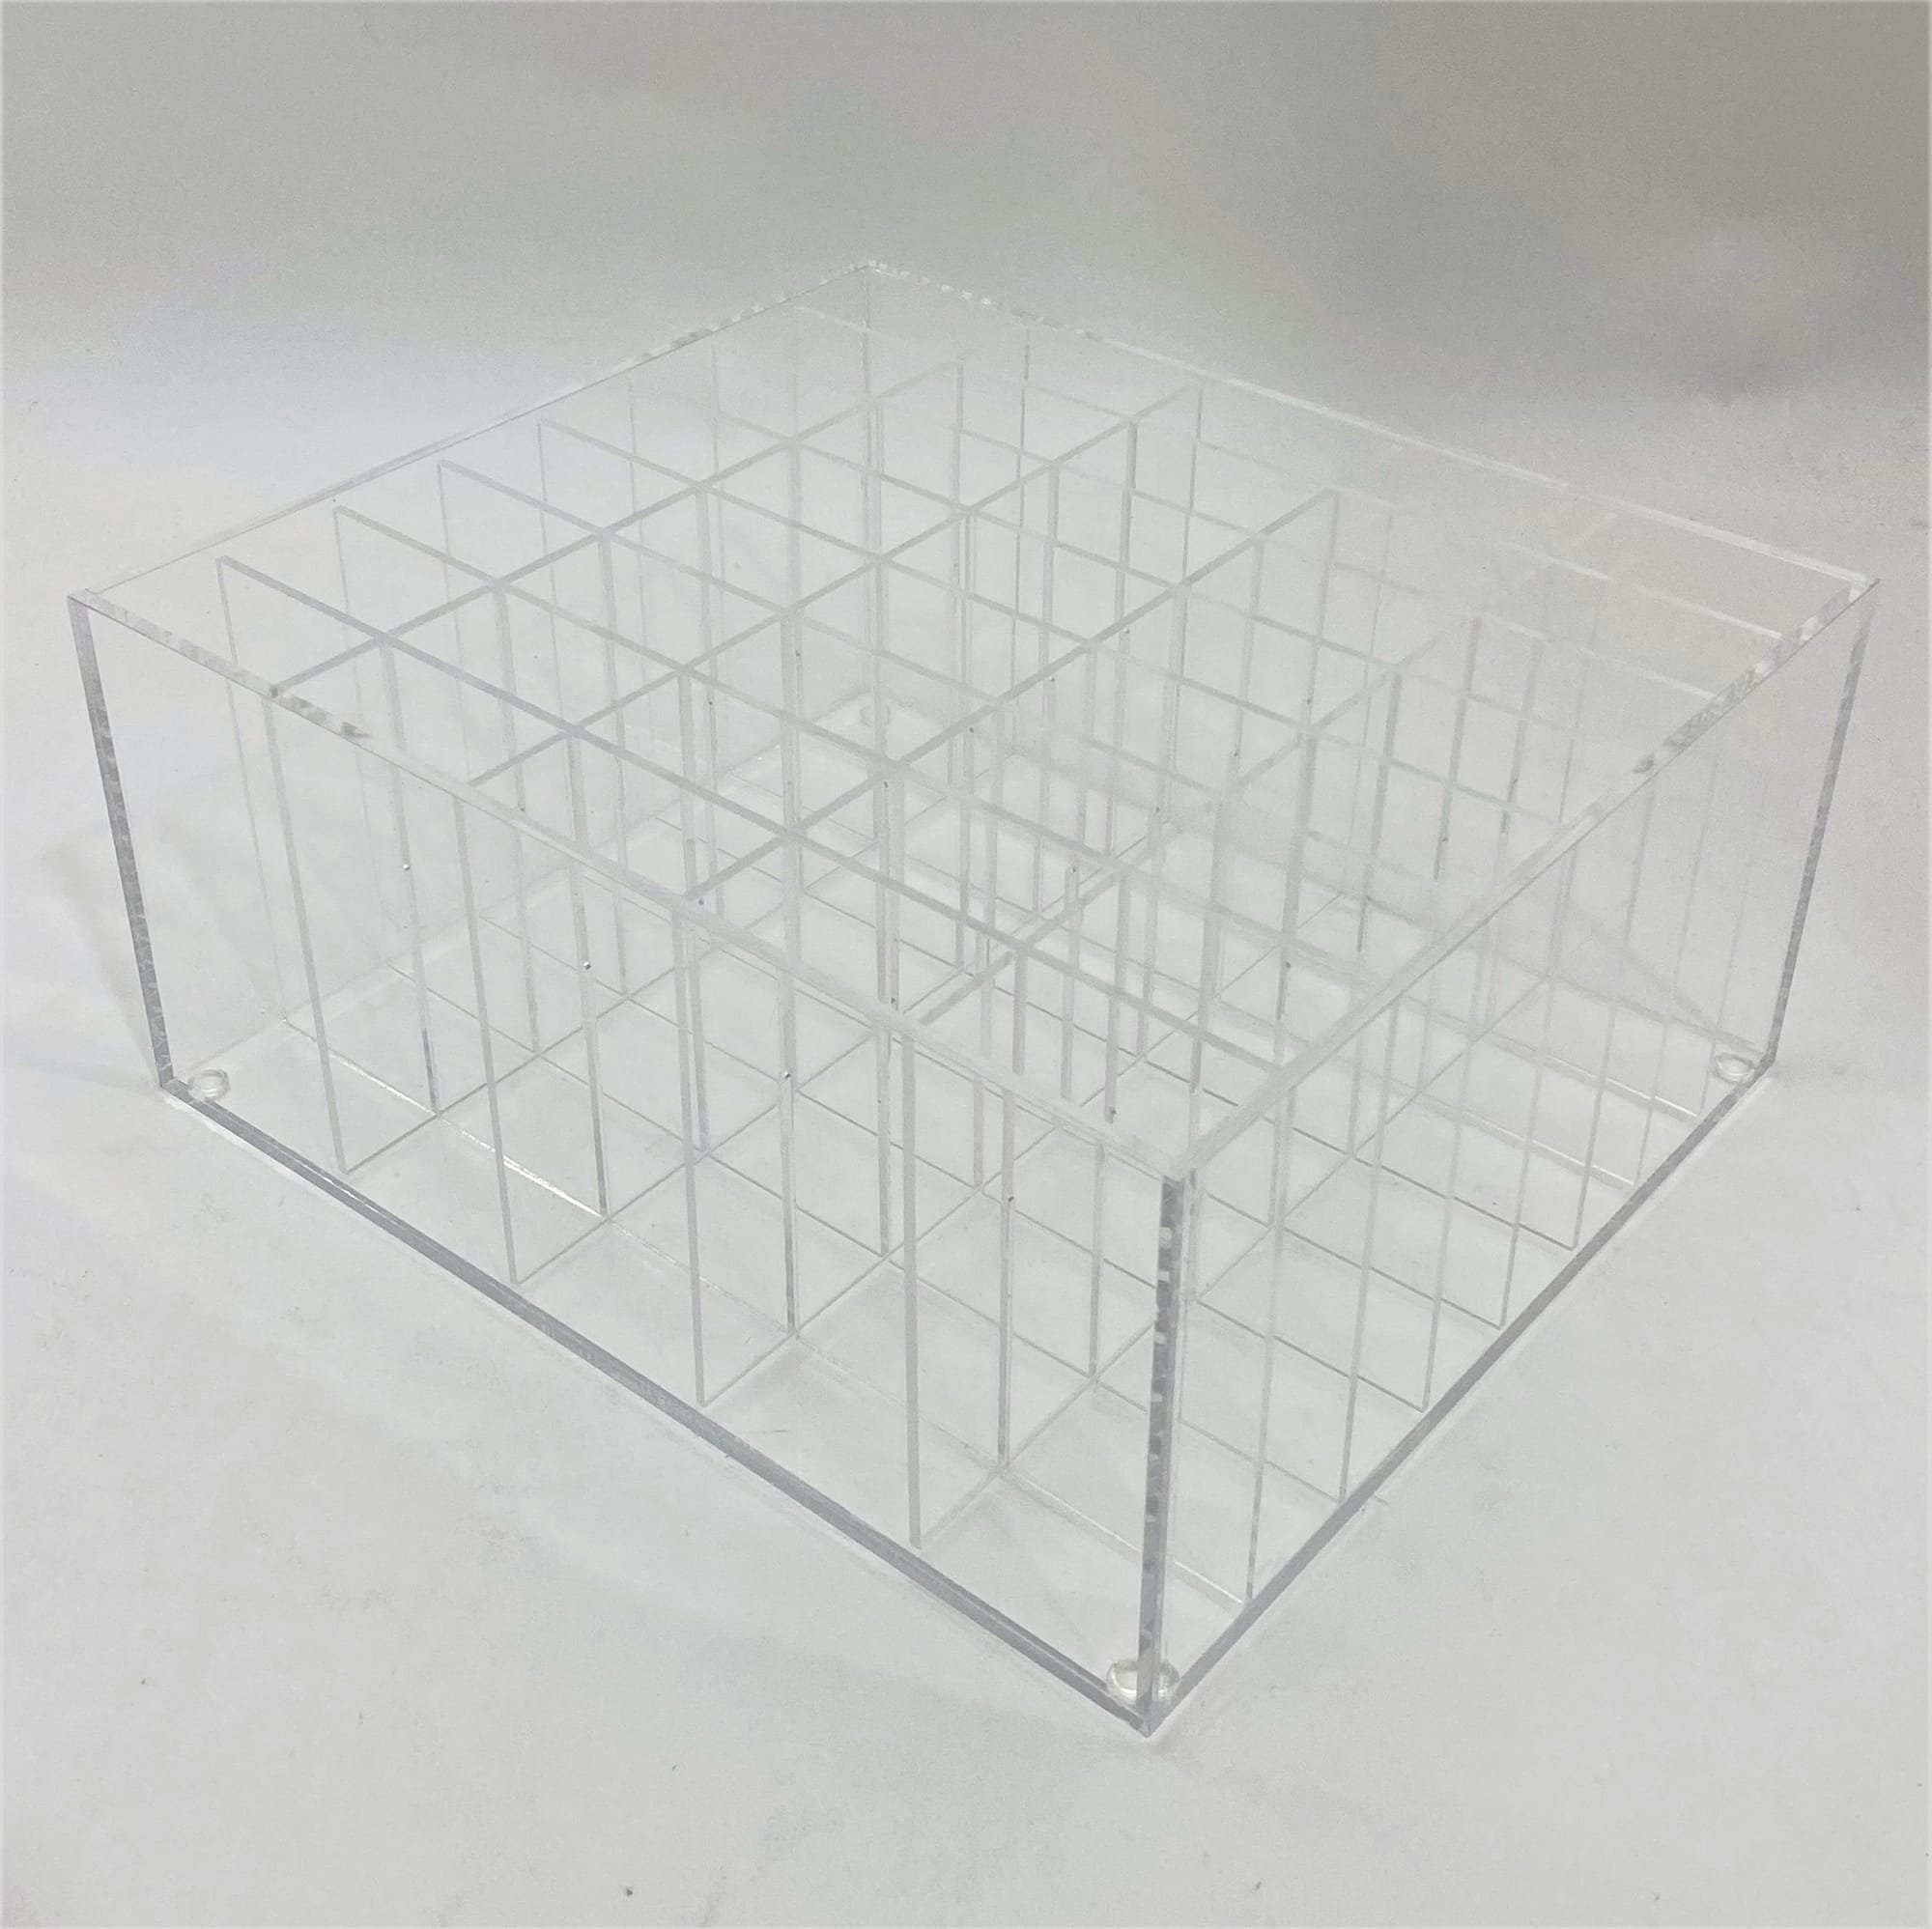 Clear Acrylic Compartment Slot Display